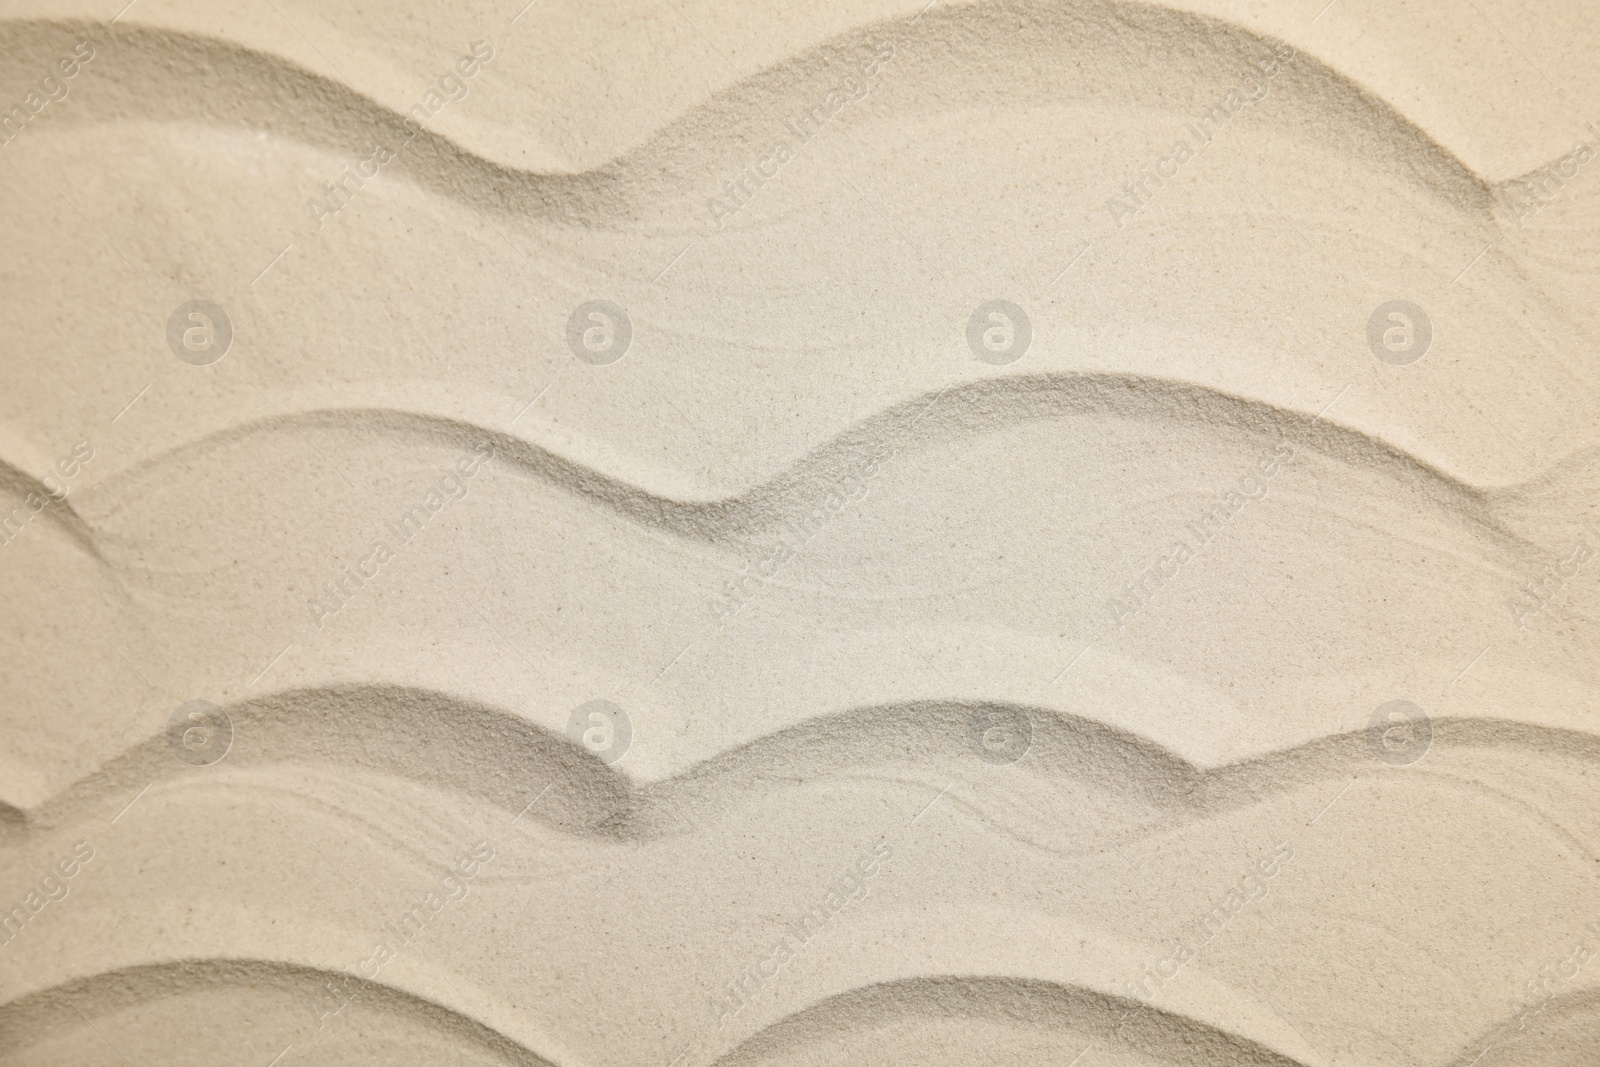 Photo of Waves made on sand as background, top view